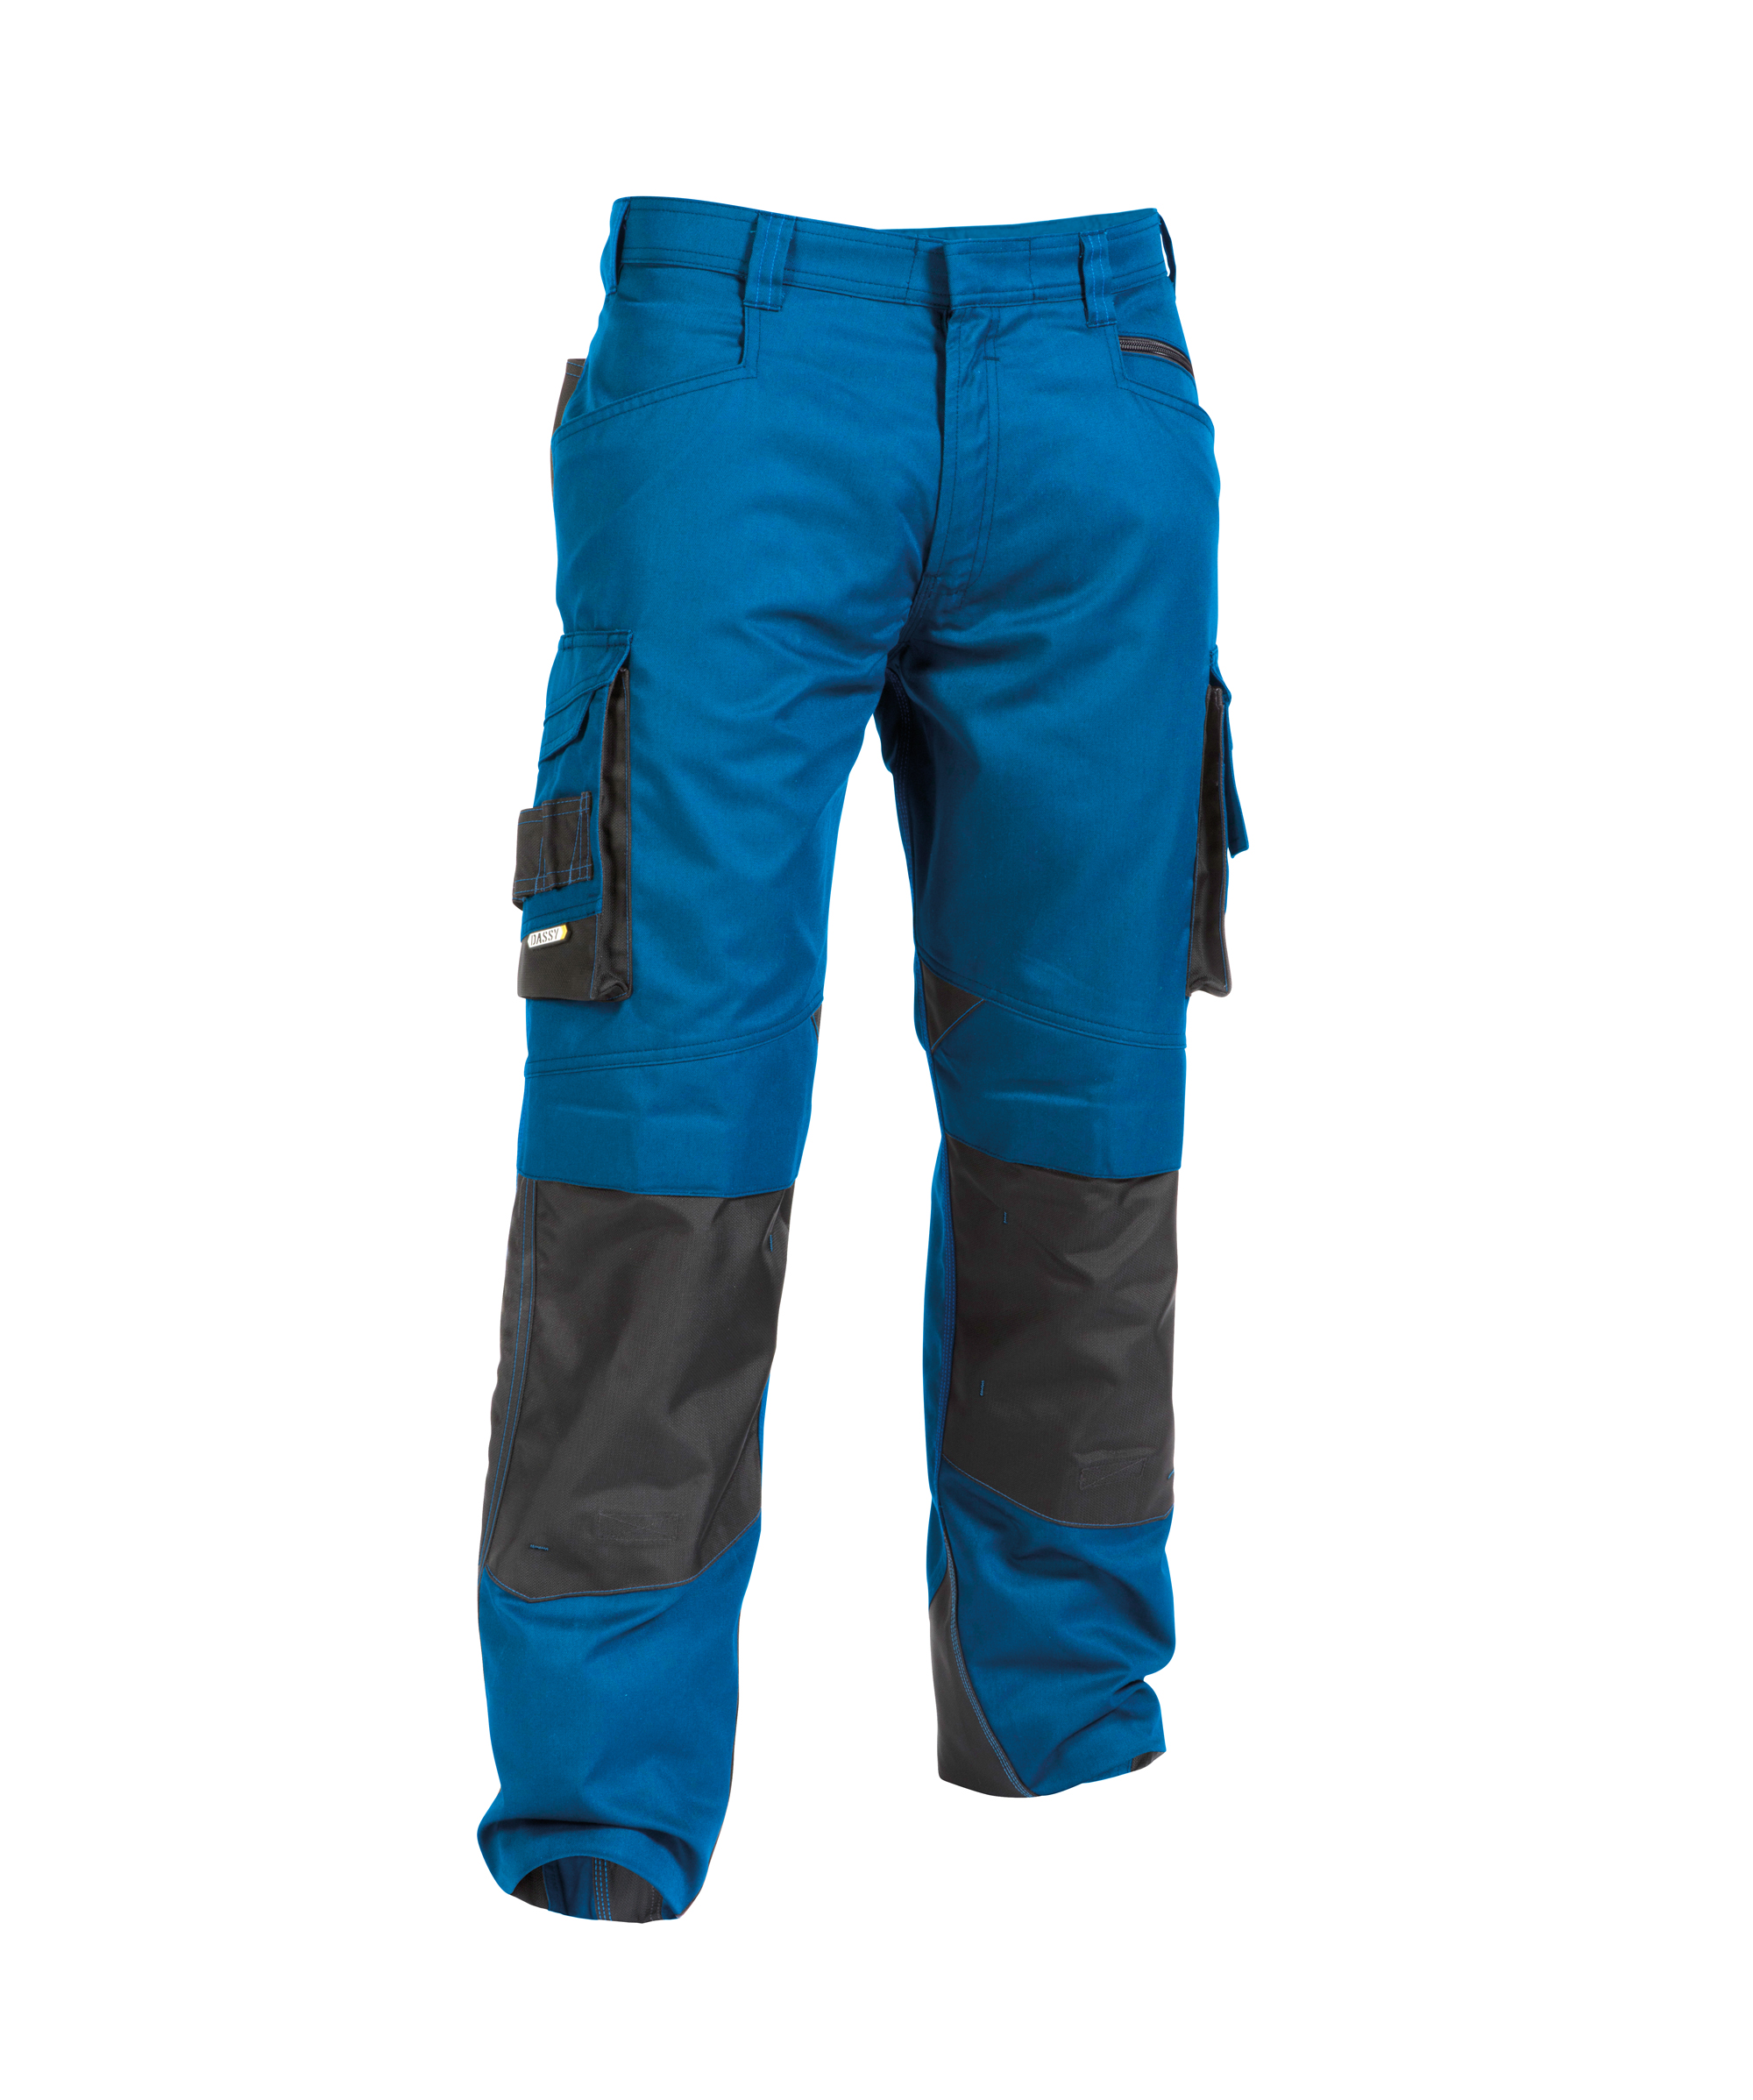 nova_two-tone-work-trousers-with-knee-pockets_azure-blue-anthracite-grey_side.jpg